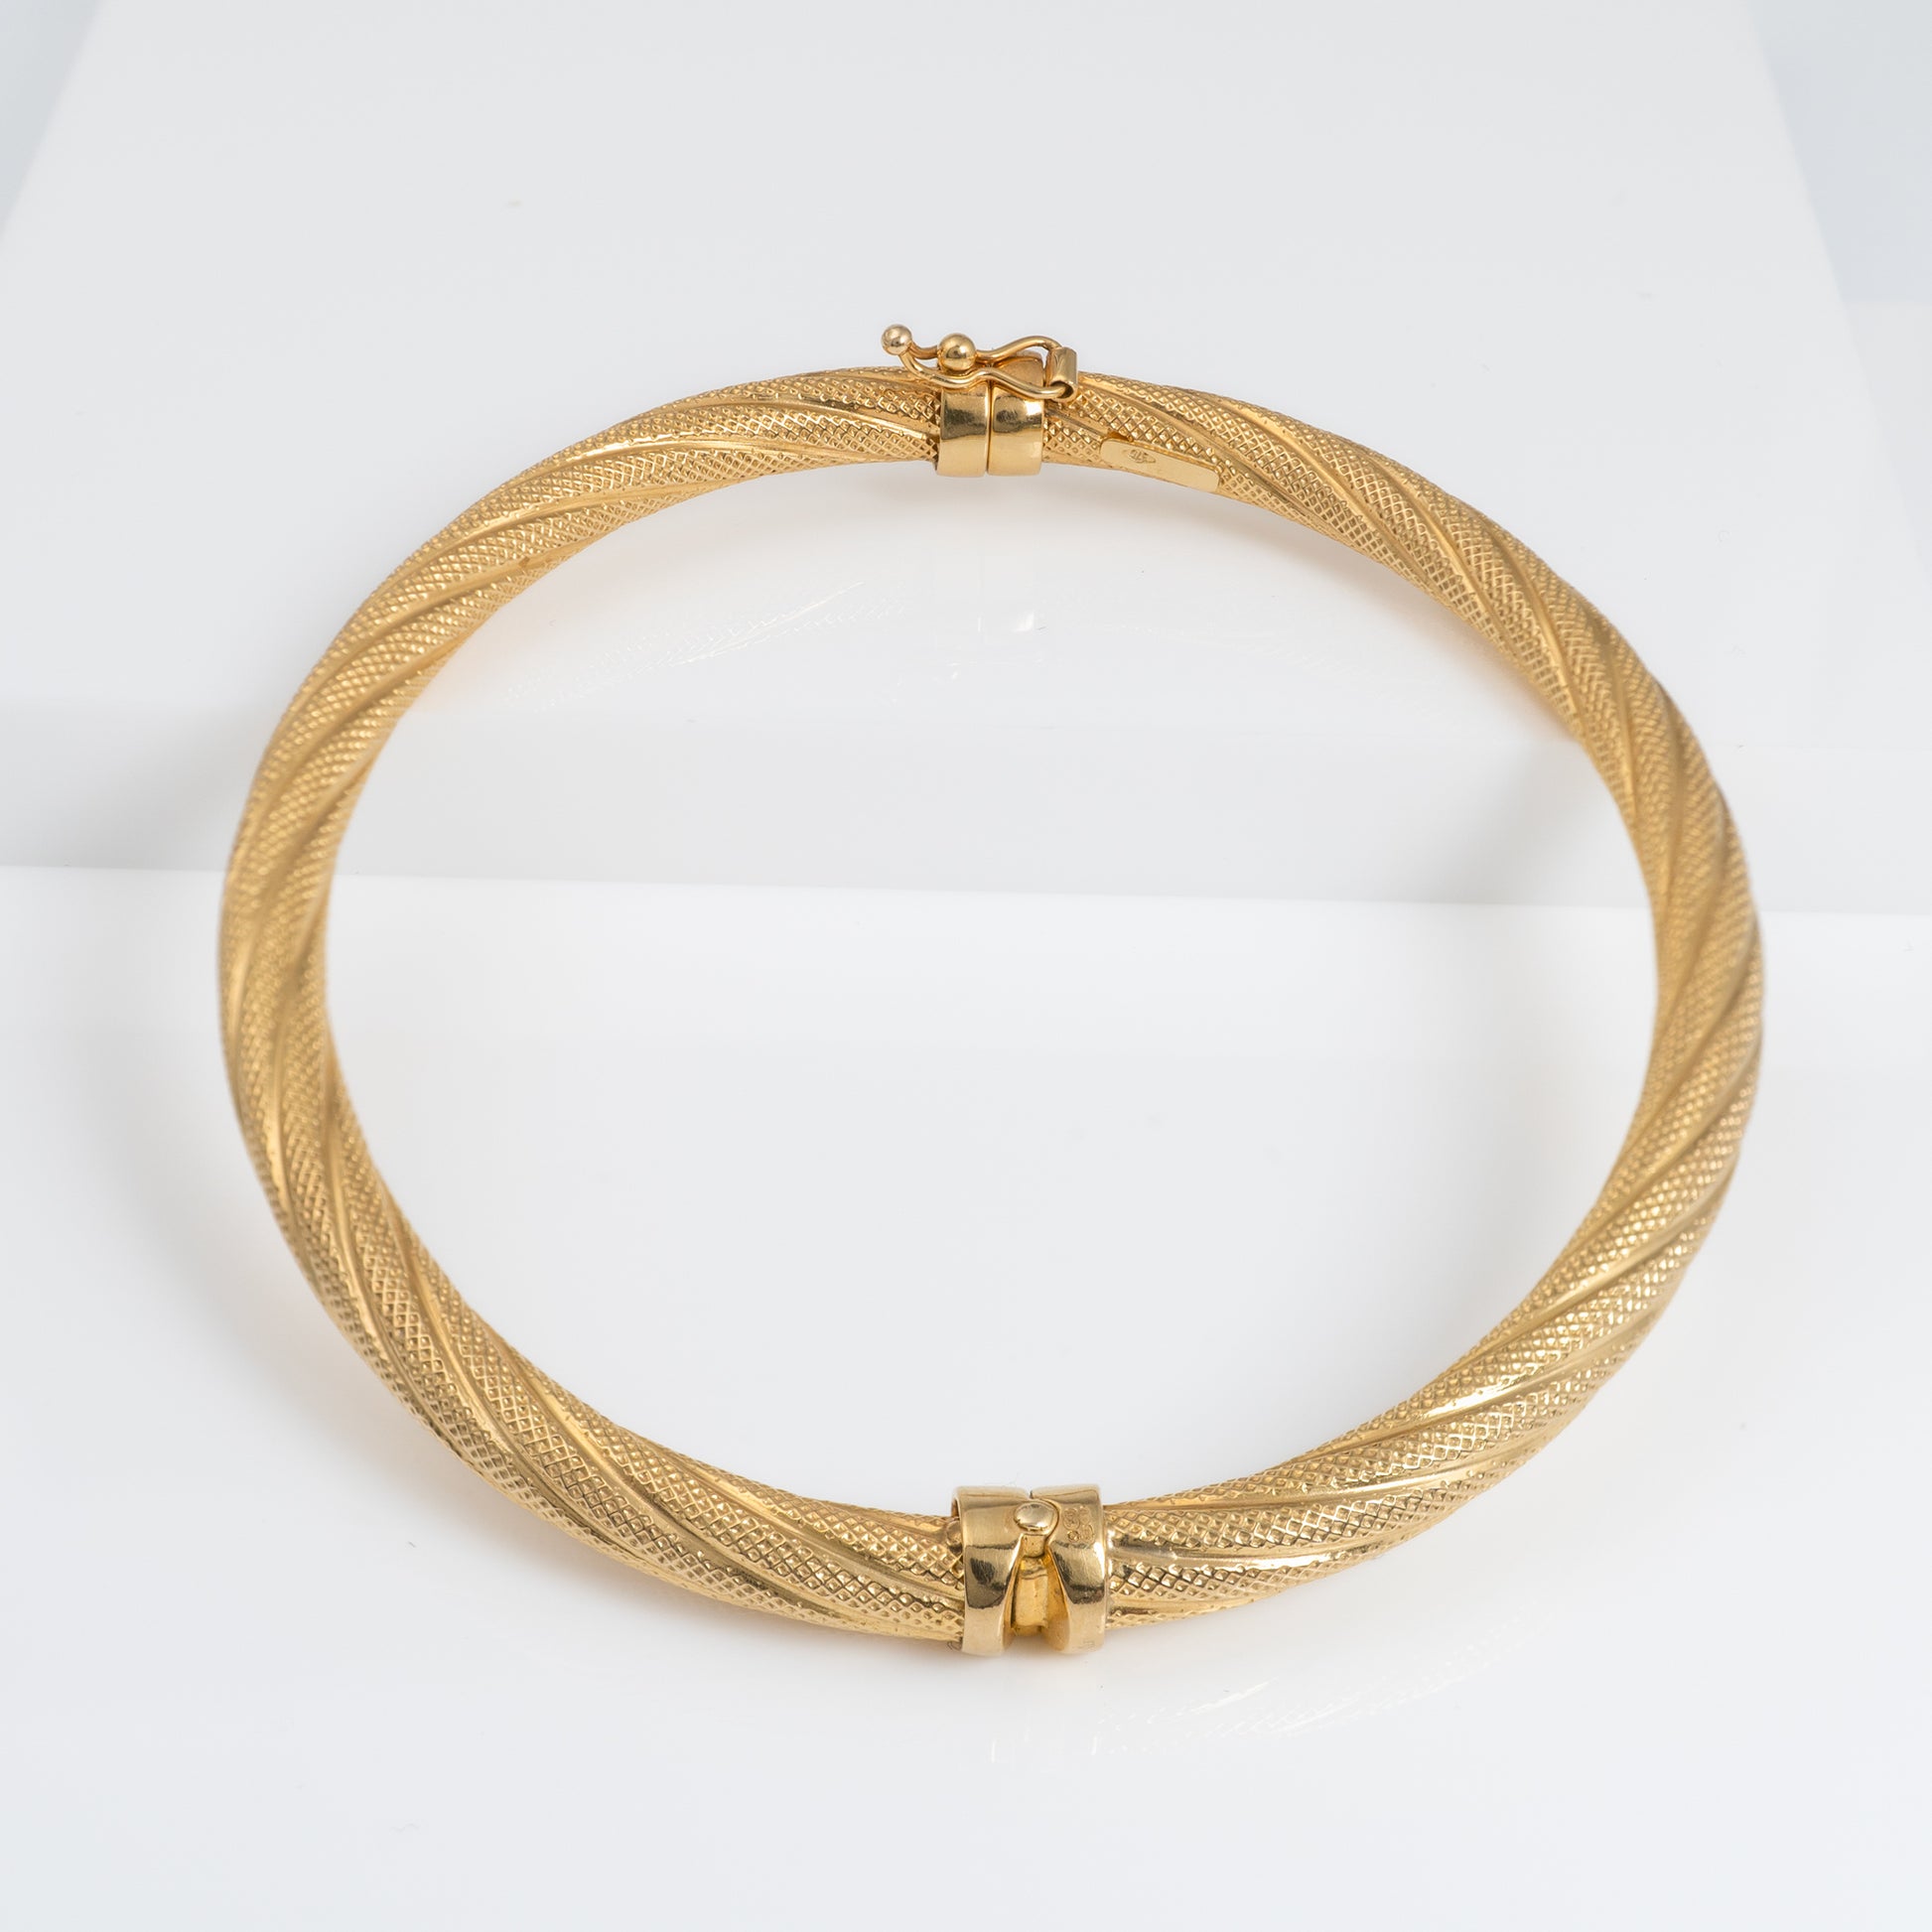 Italian textured gold bracelet with safety lock